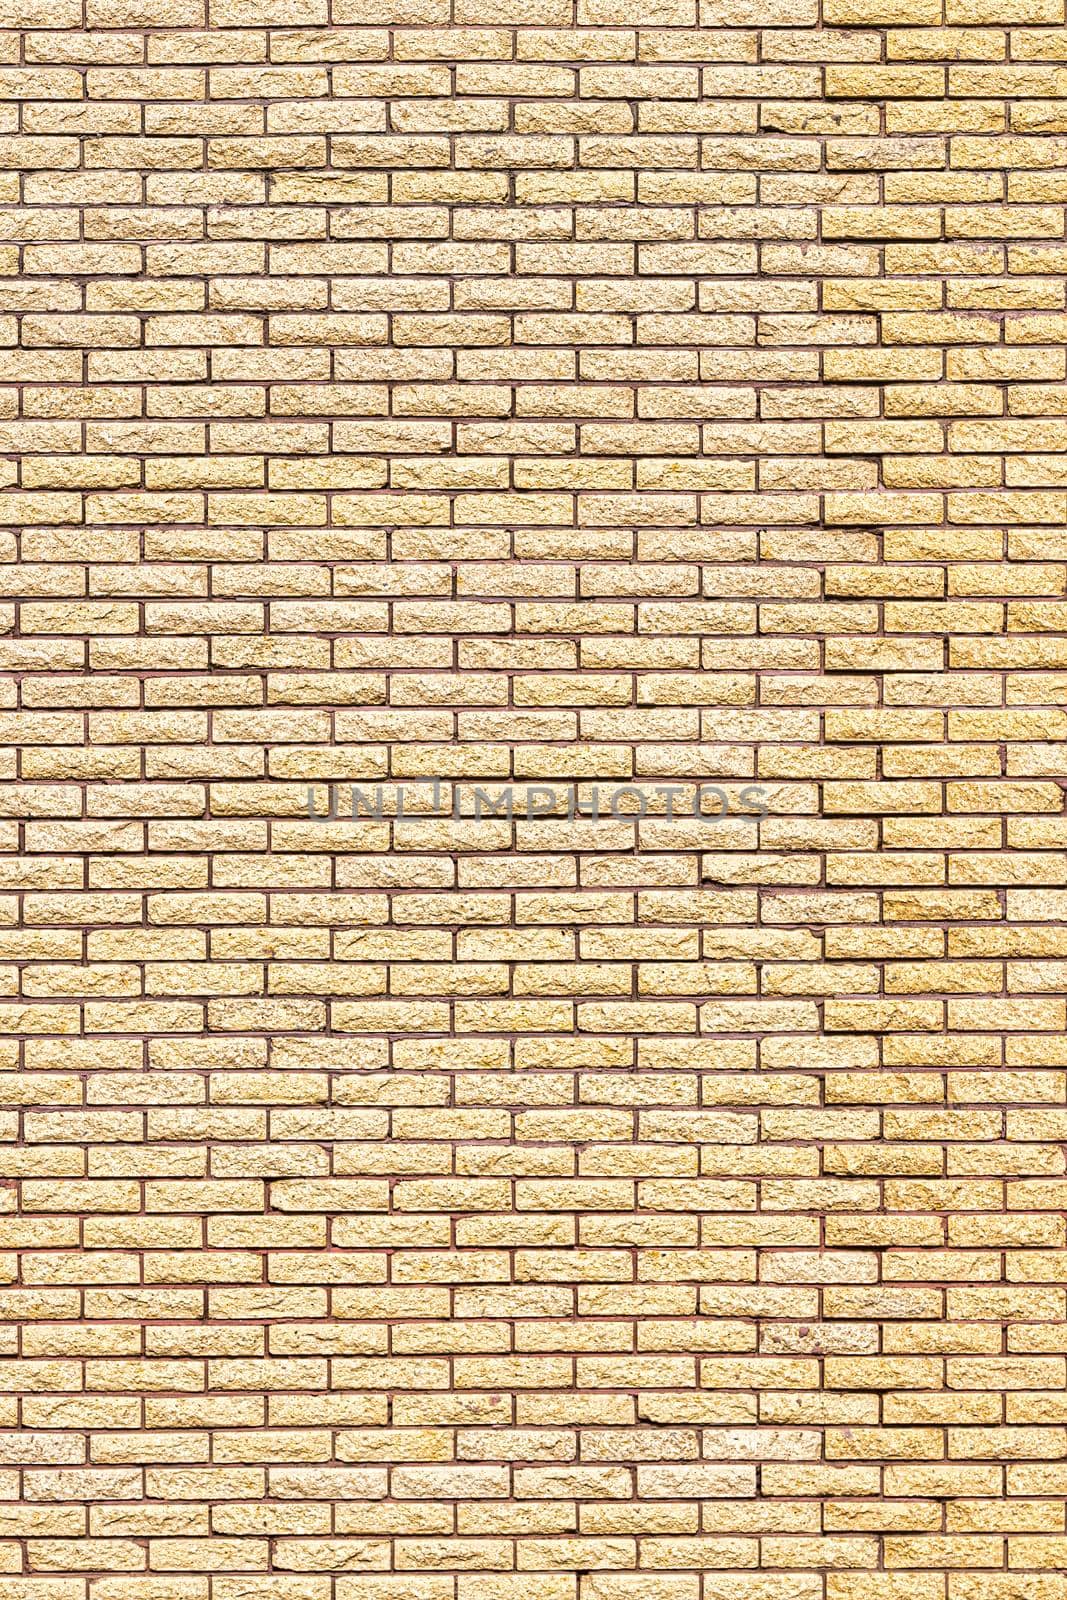 Yellow decorative brick wall texture. Abstract background for design.